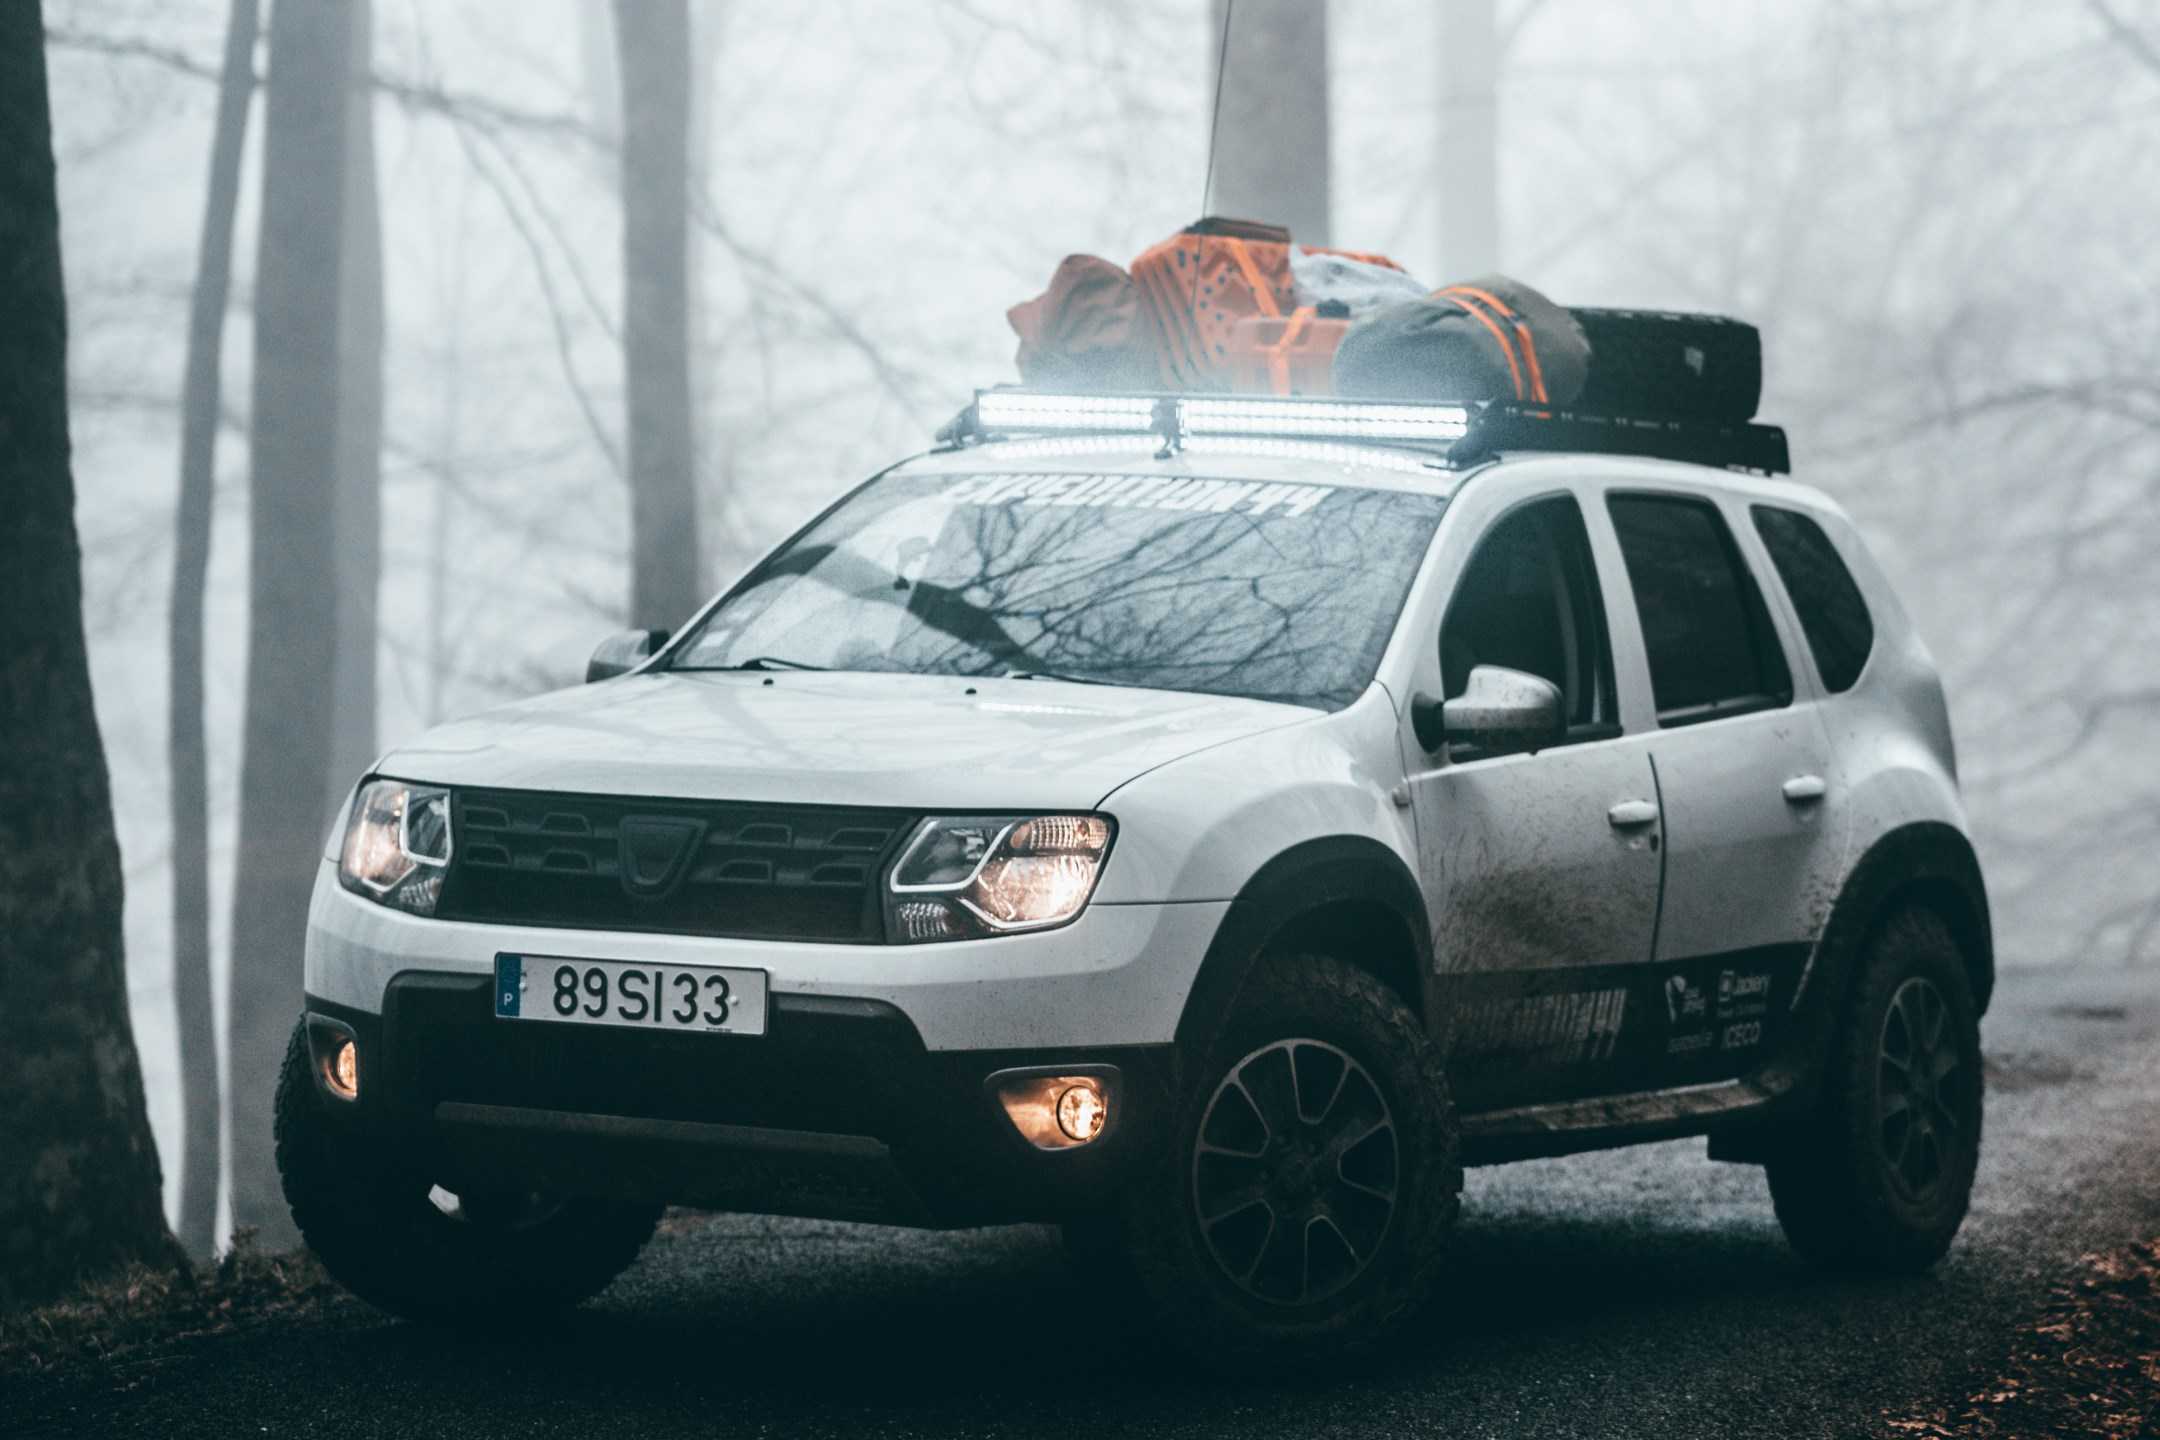 New Duster Extreme SE Is The Most Expensive Dacia Ever Priced Up To £21,645  ($29.3k)